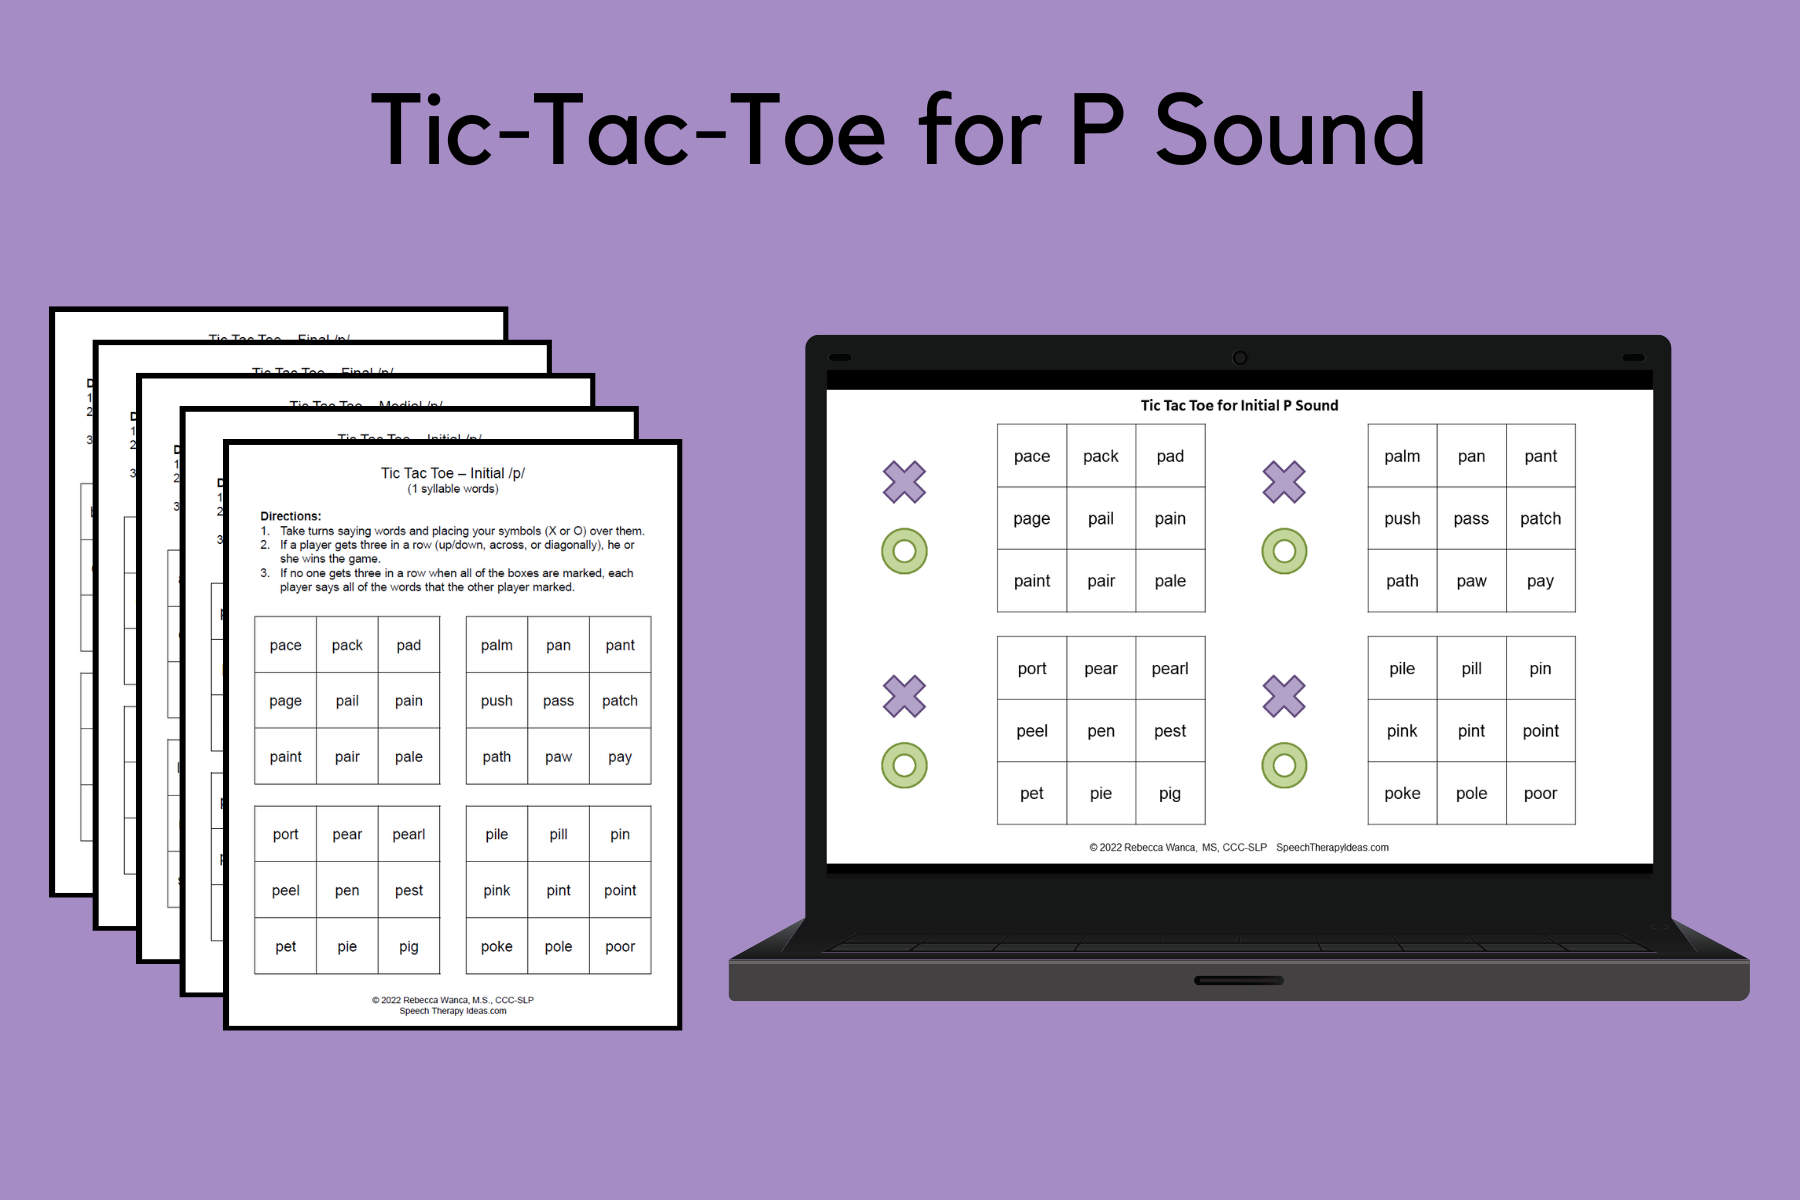 Tic-Tac-Toe Games For P Sound